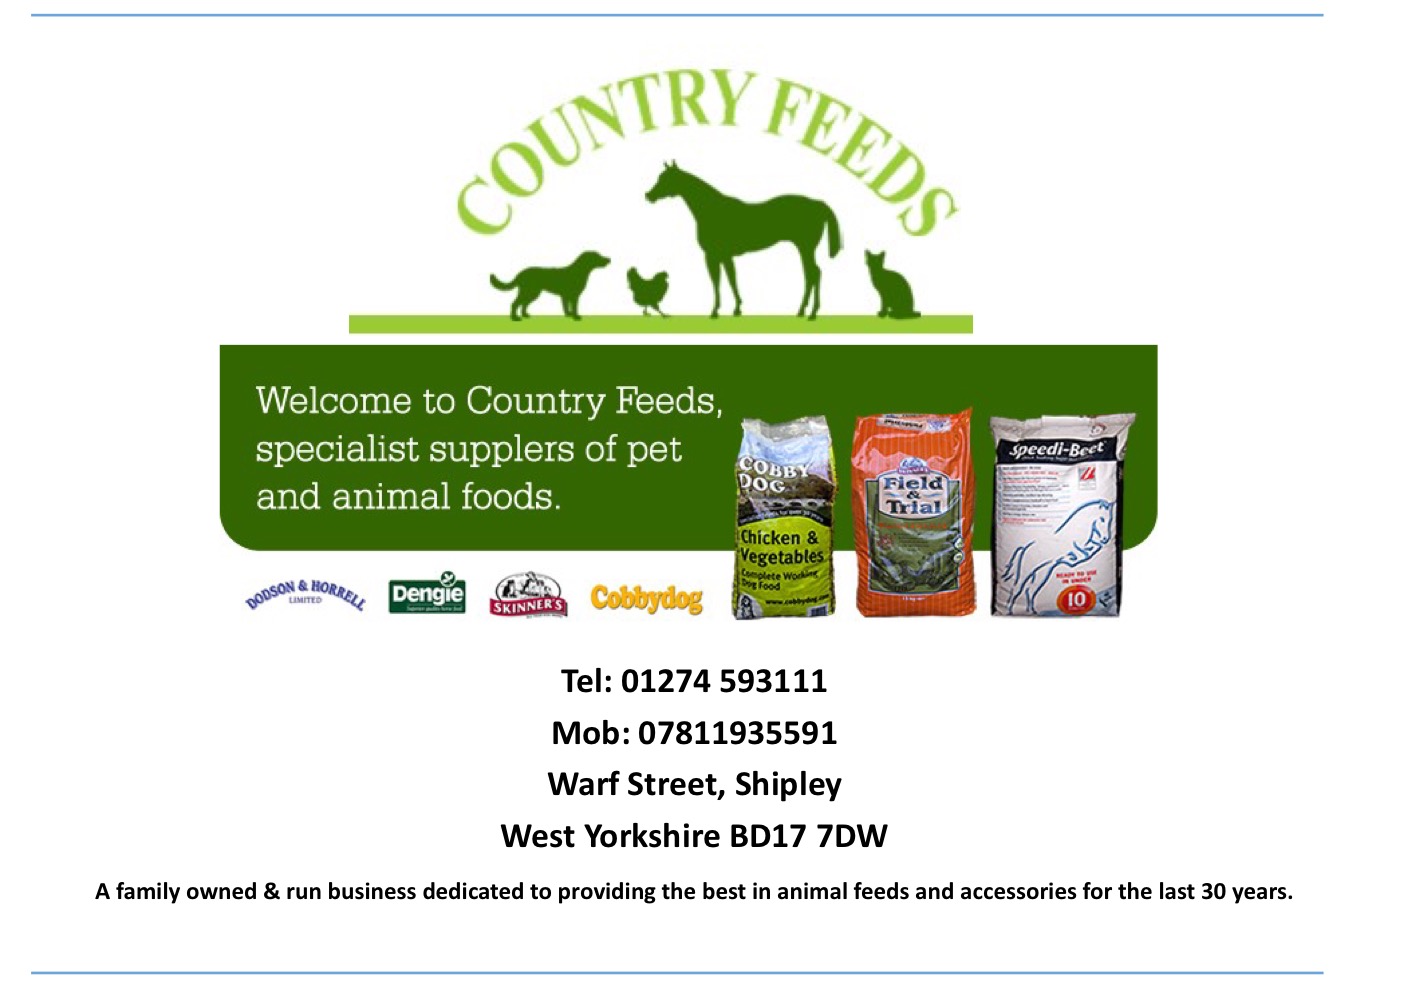 Country feeds